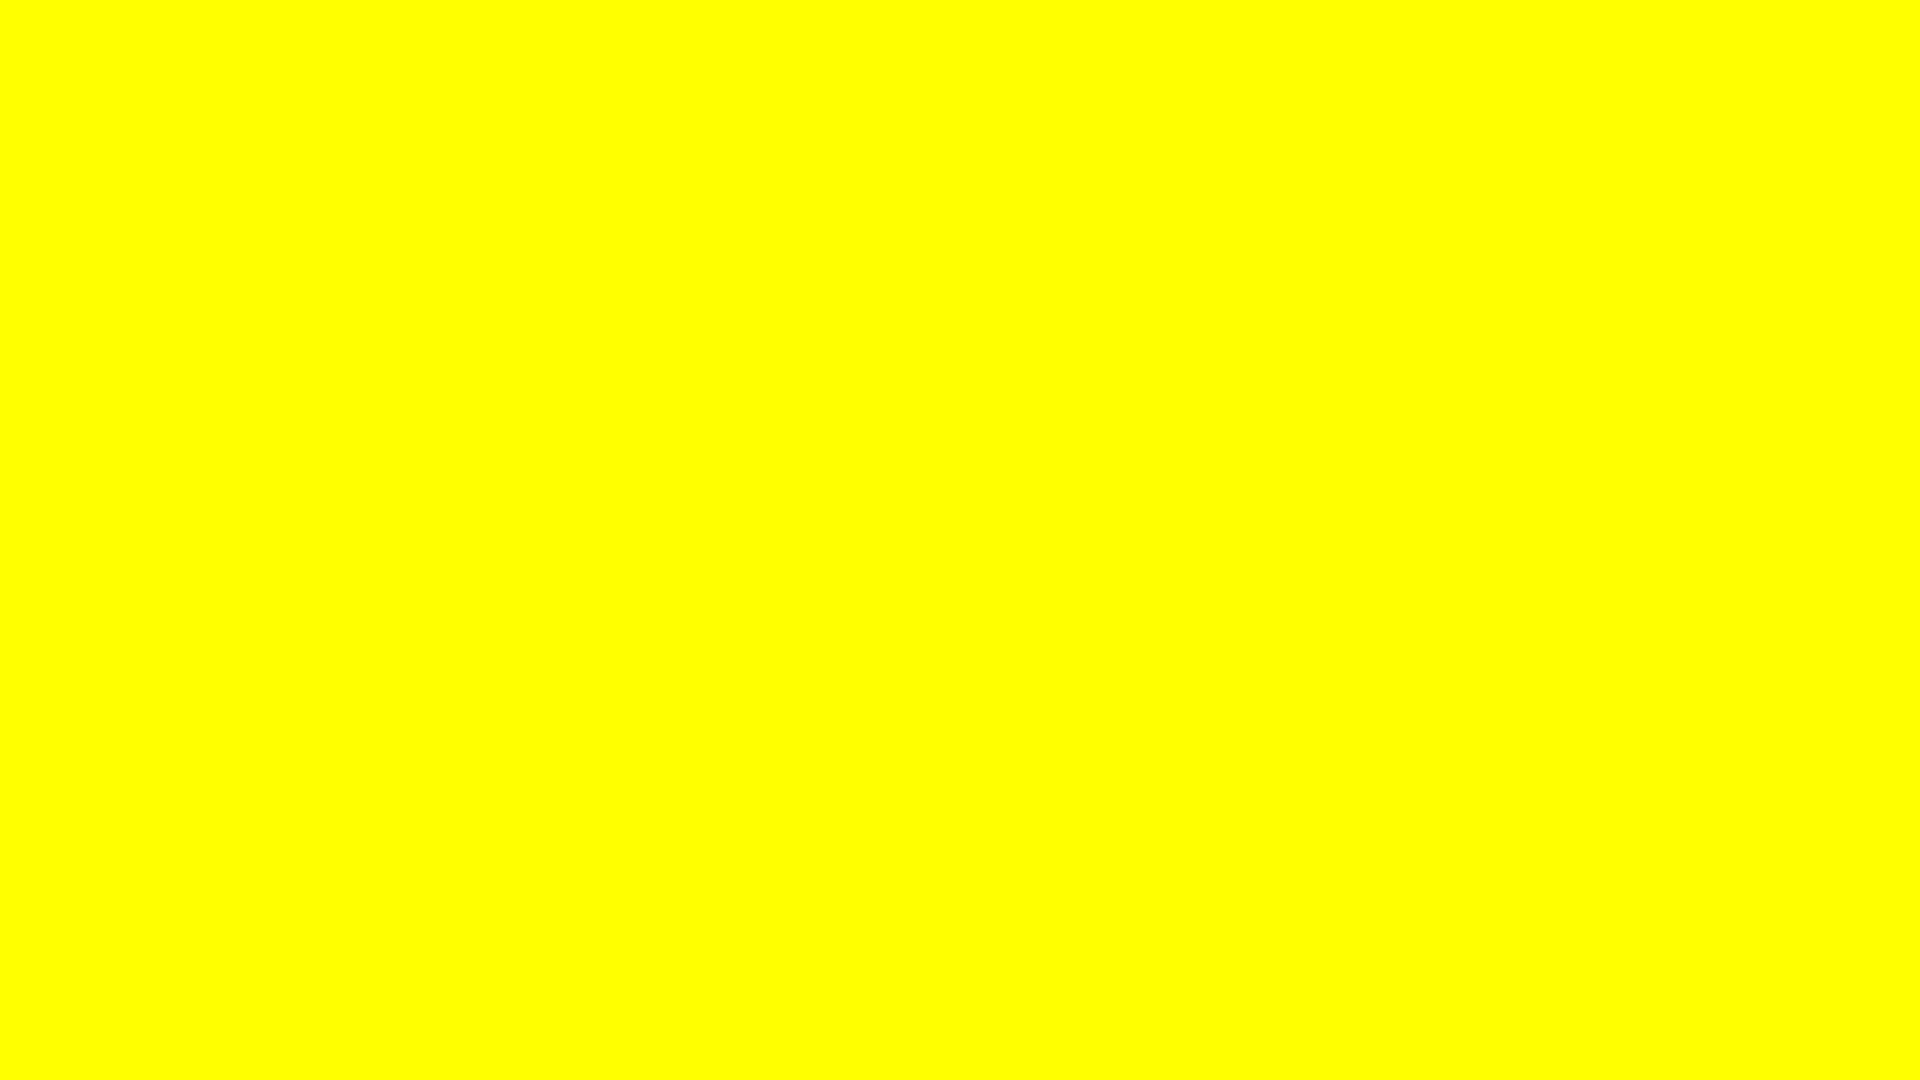 Solid Yellow Background Wallpaper